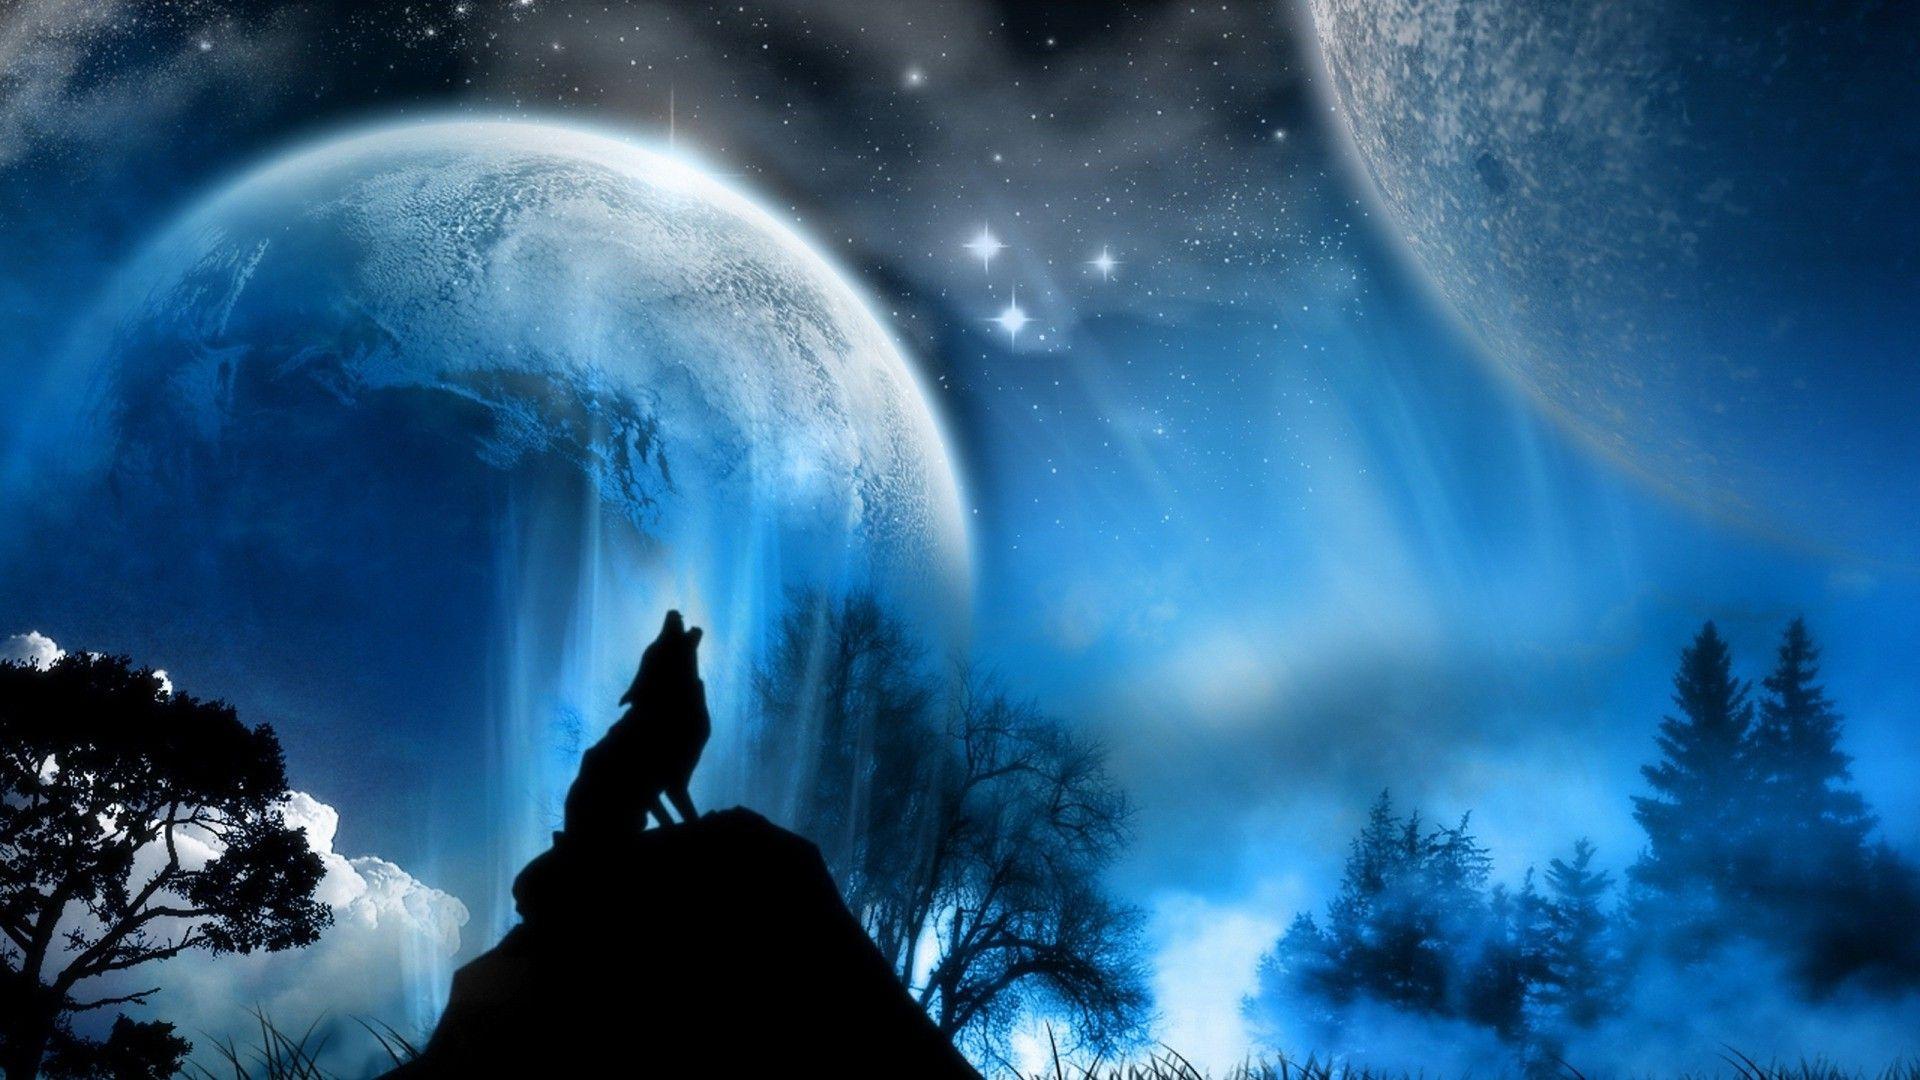 Wolf Howling at Full Moon Wallpaper. Wolf wallpaper, Fantasy wolf